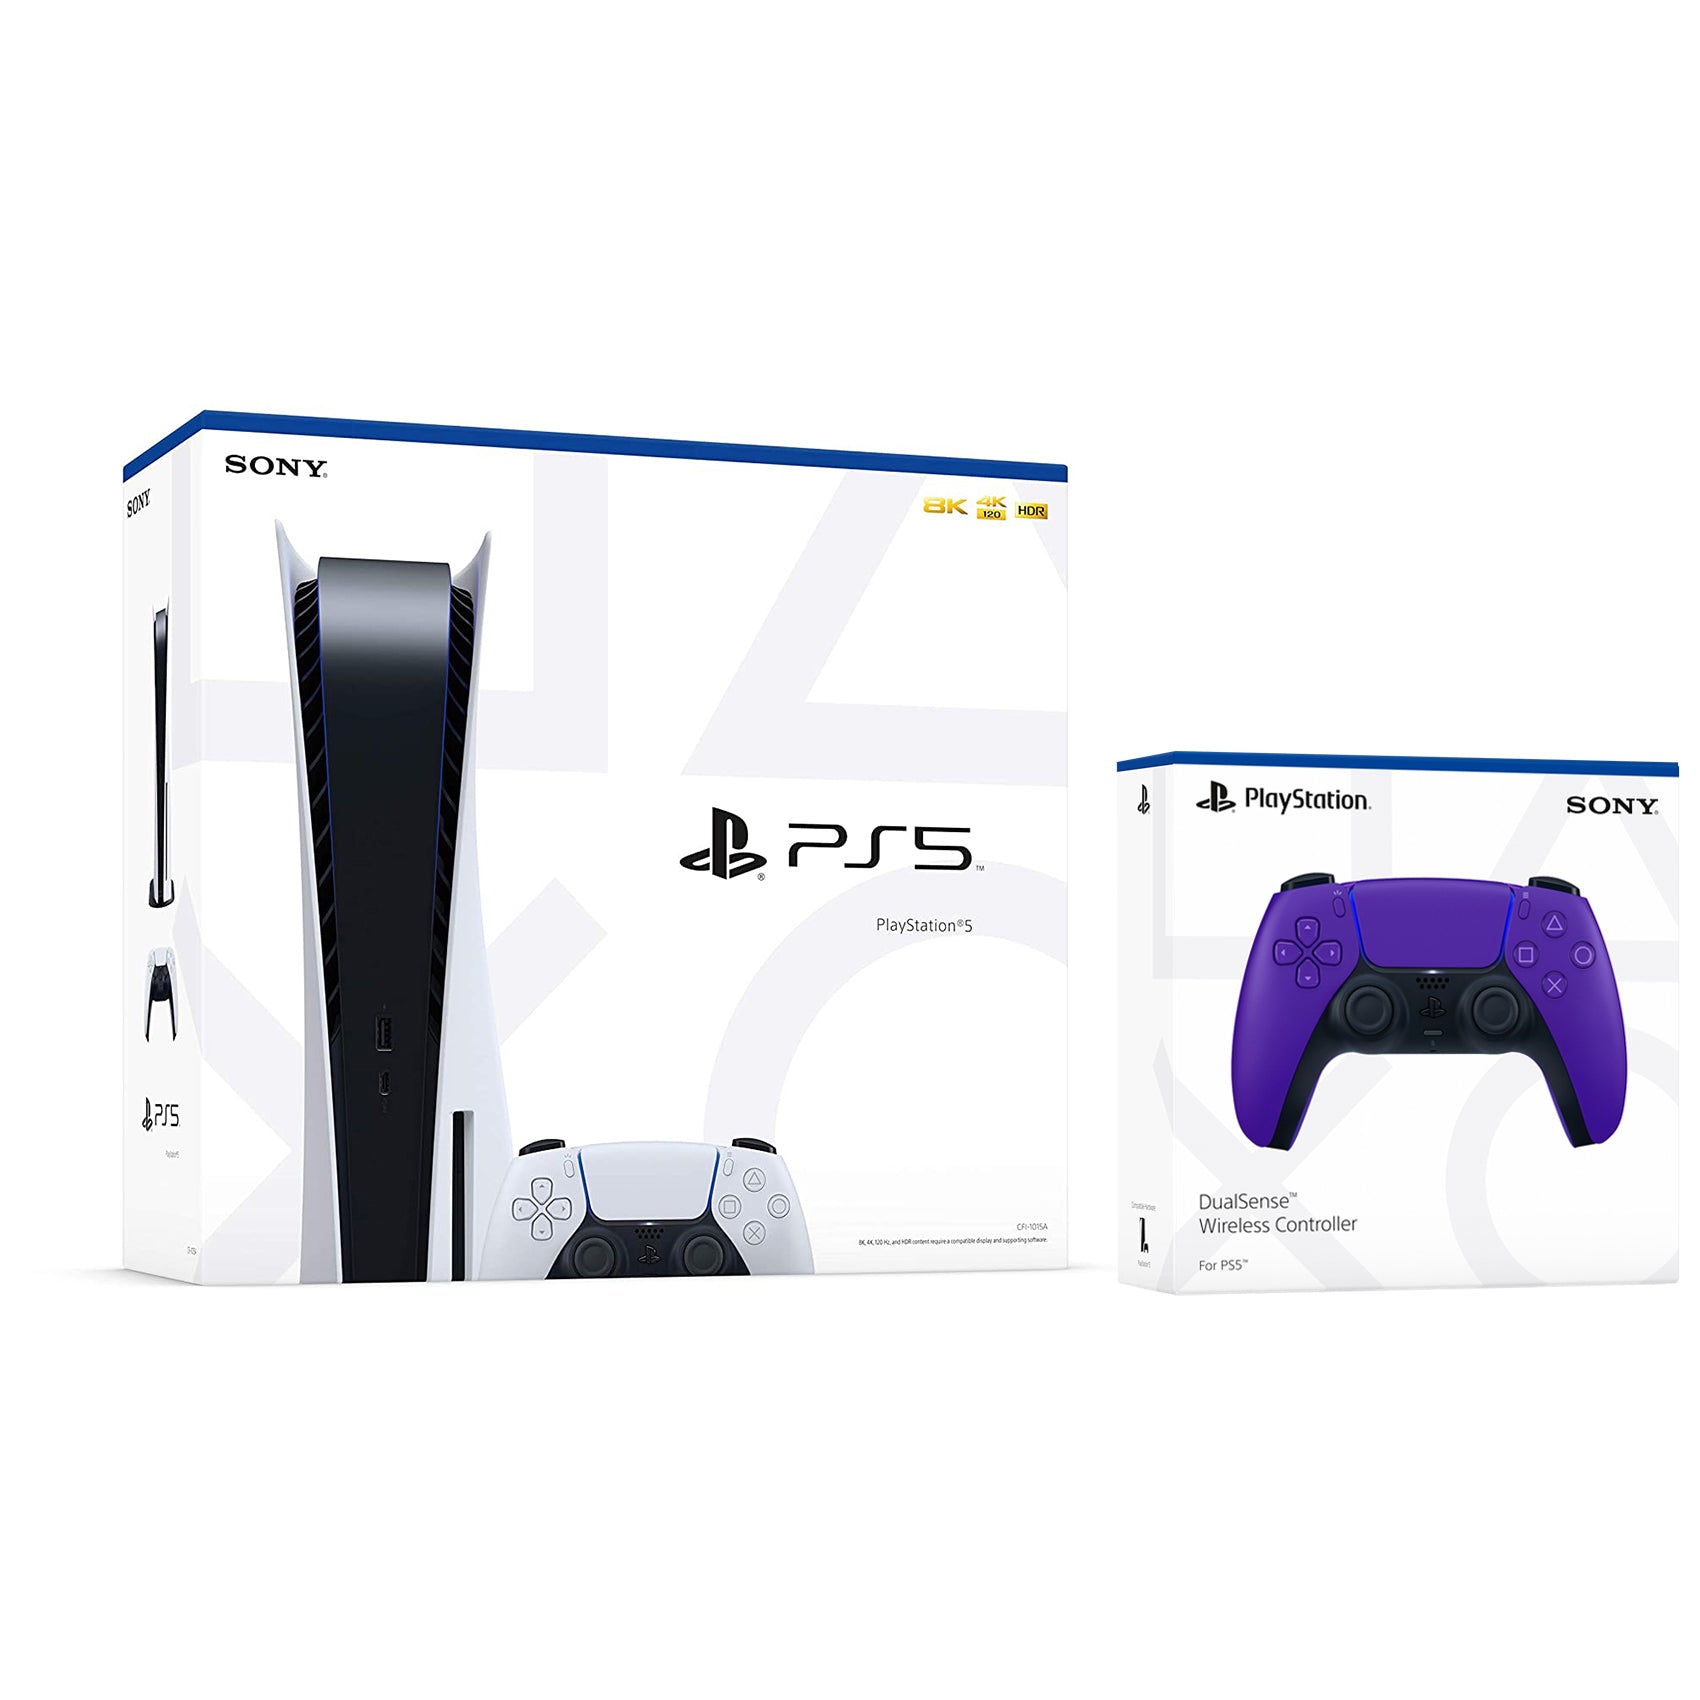 Sony Playstation 5 Disc Version (Sony PS5 Disc) with Extra DualSense Controller - Galactic Purple Bundle - Pro-Distributing